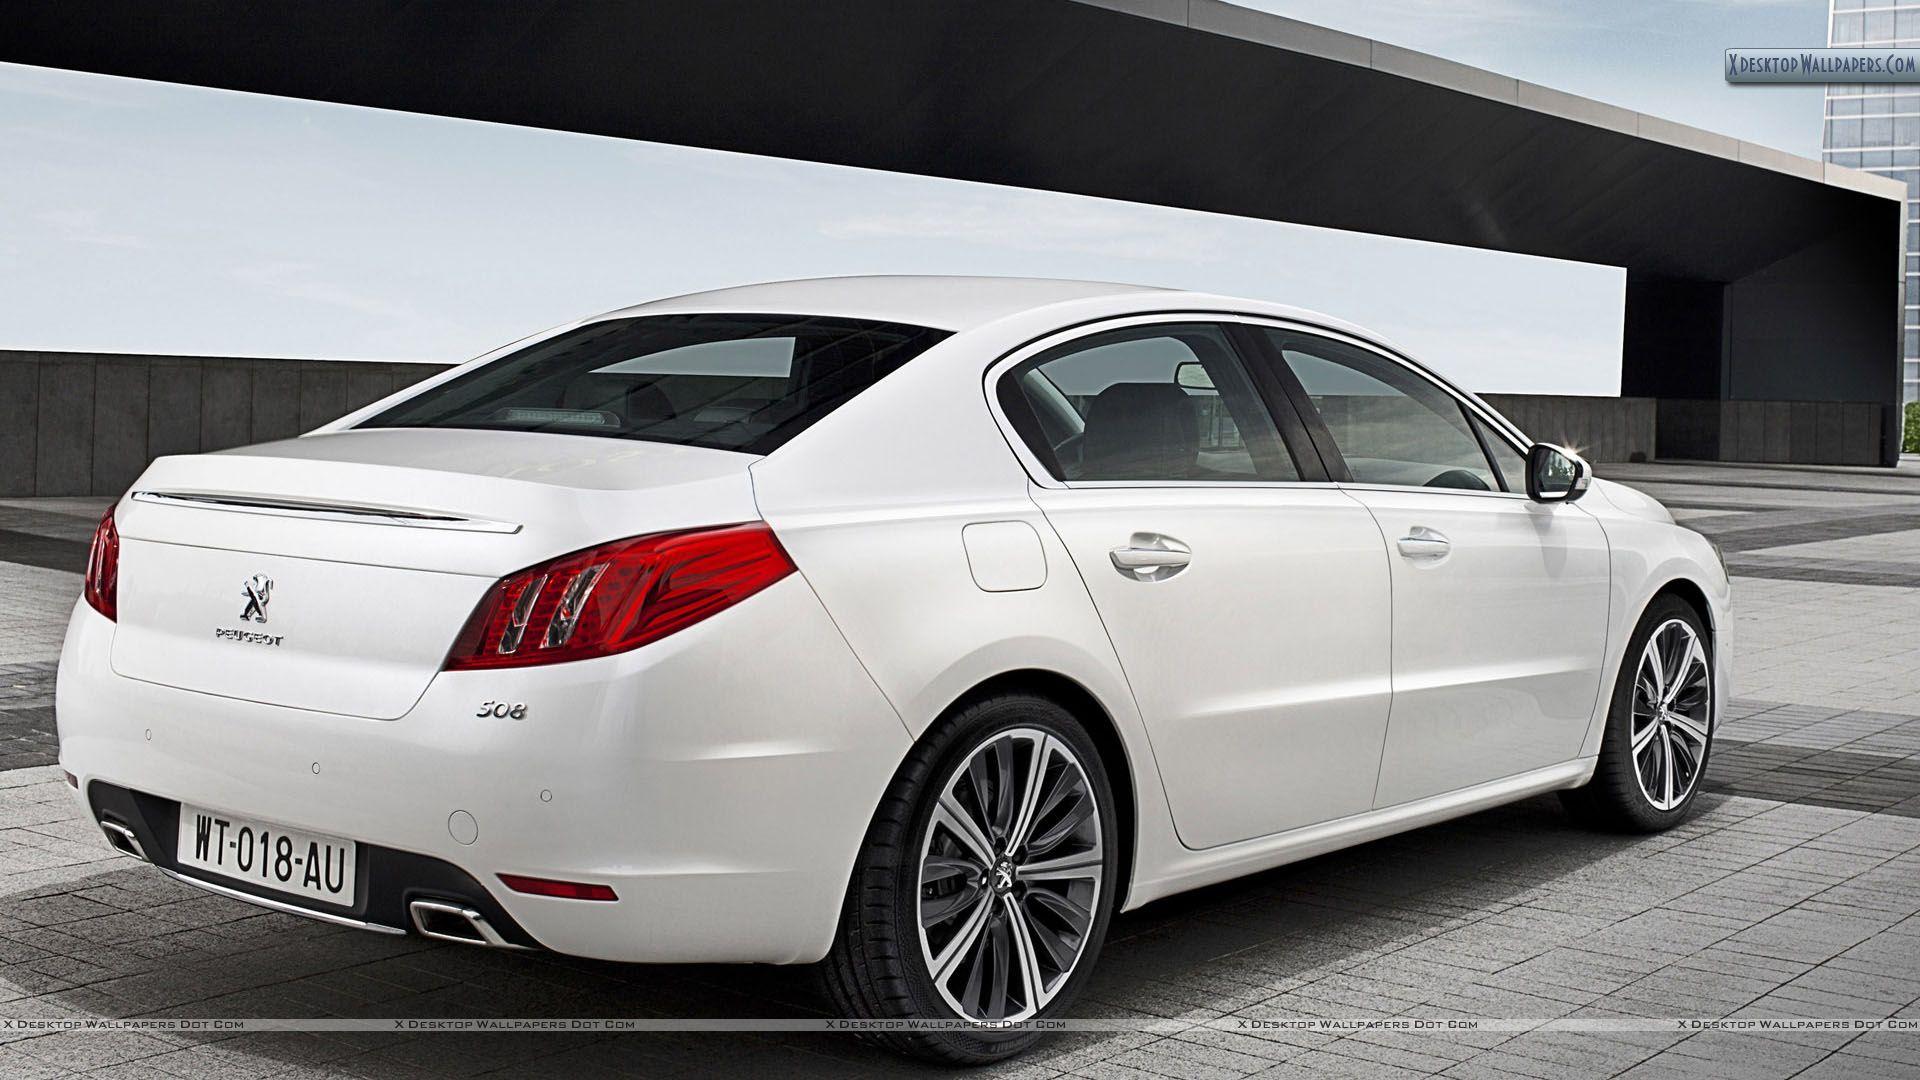 Peugeot 508 Saloon Back Pose in White Color Wallpaper